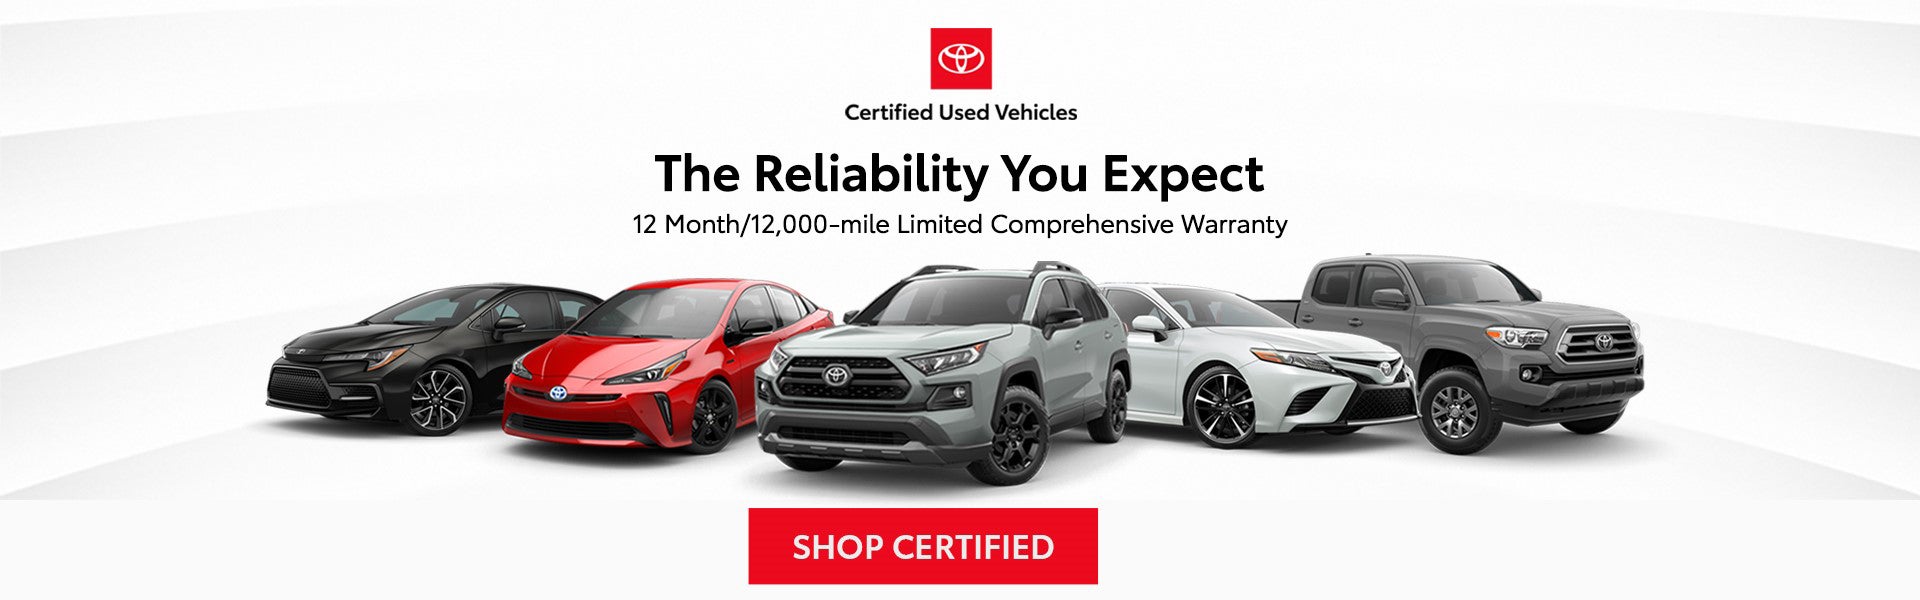 Toyota Certified Used Vehicles 12 Month/12,000-mile Limited Comprehensive Warranty